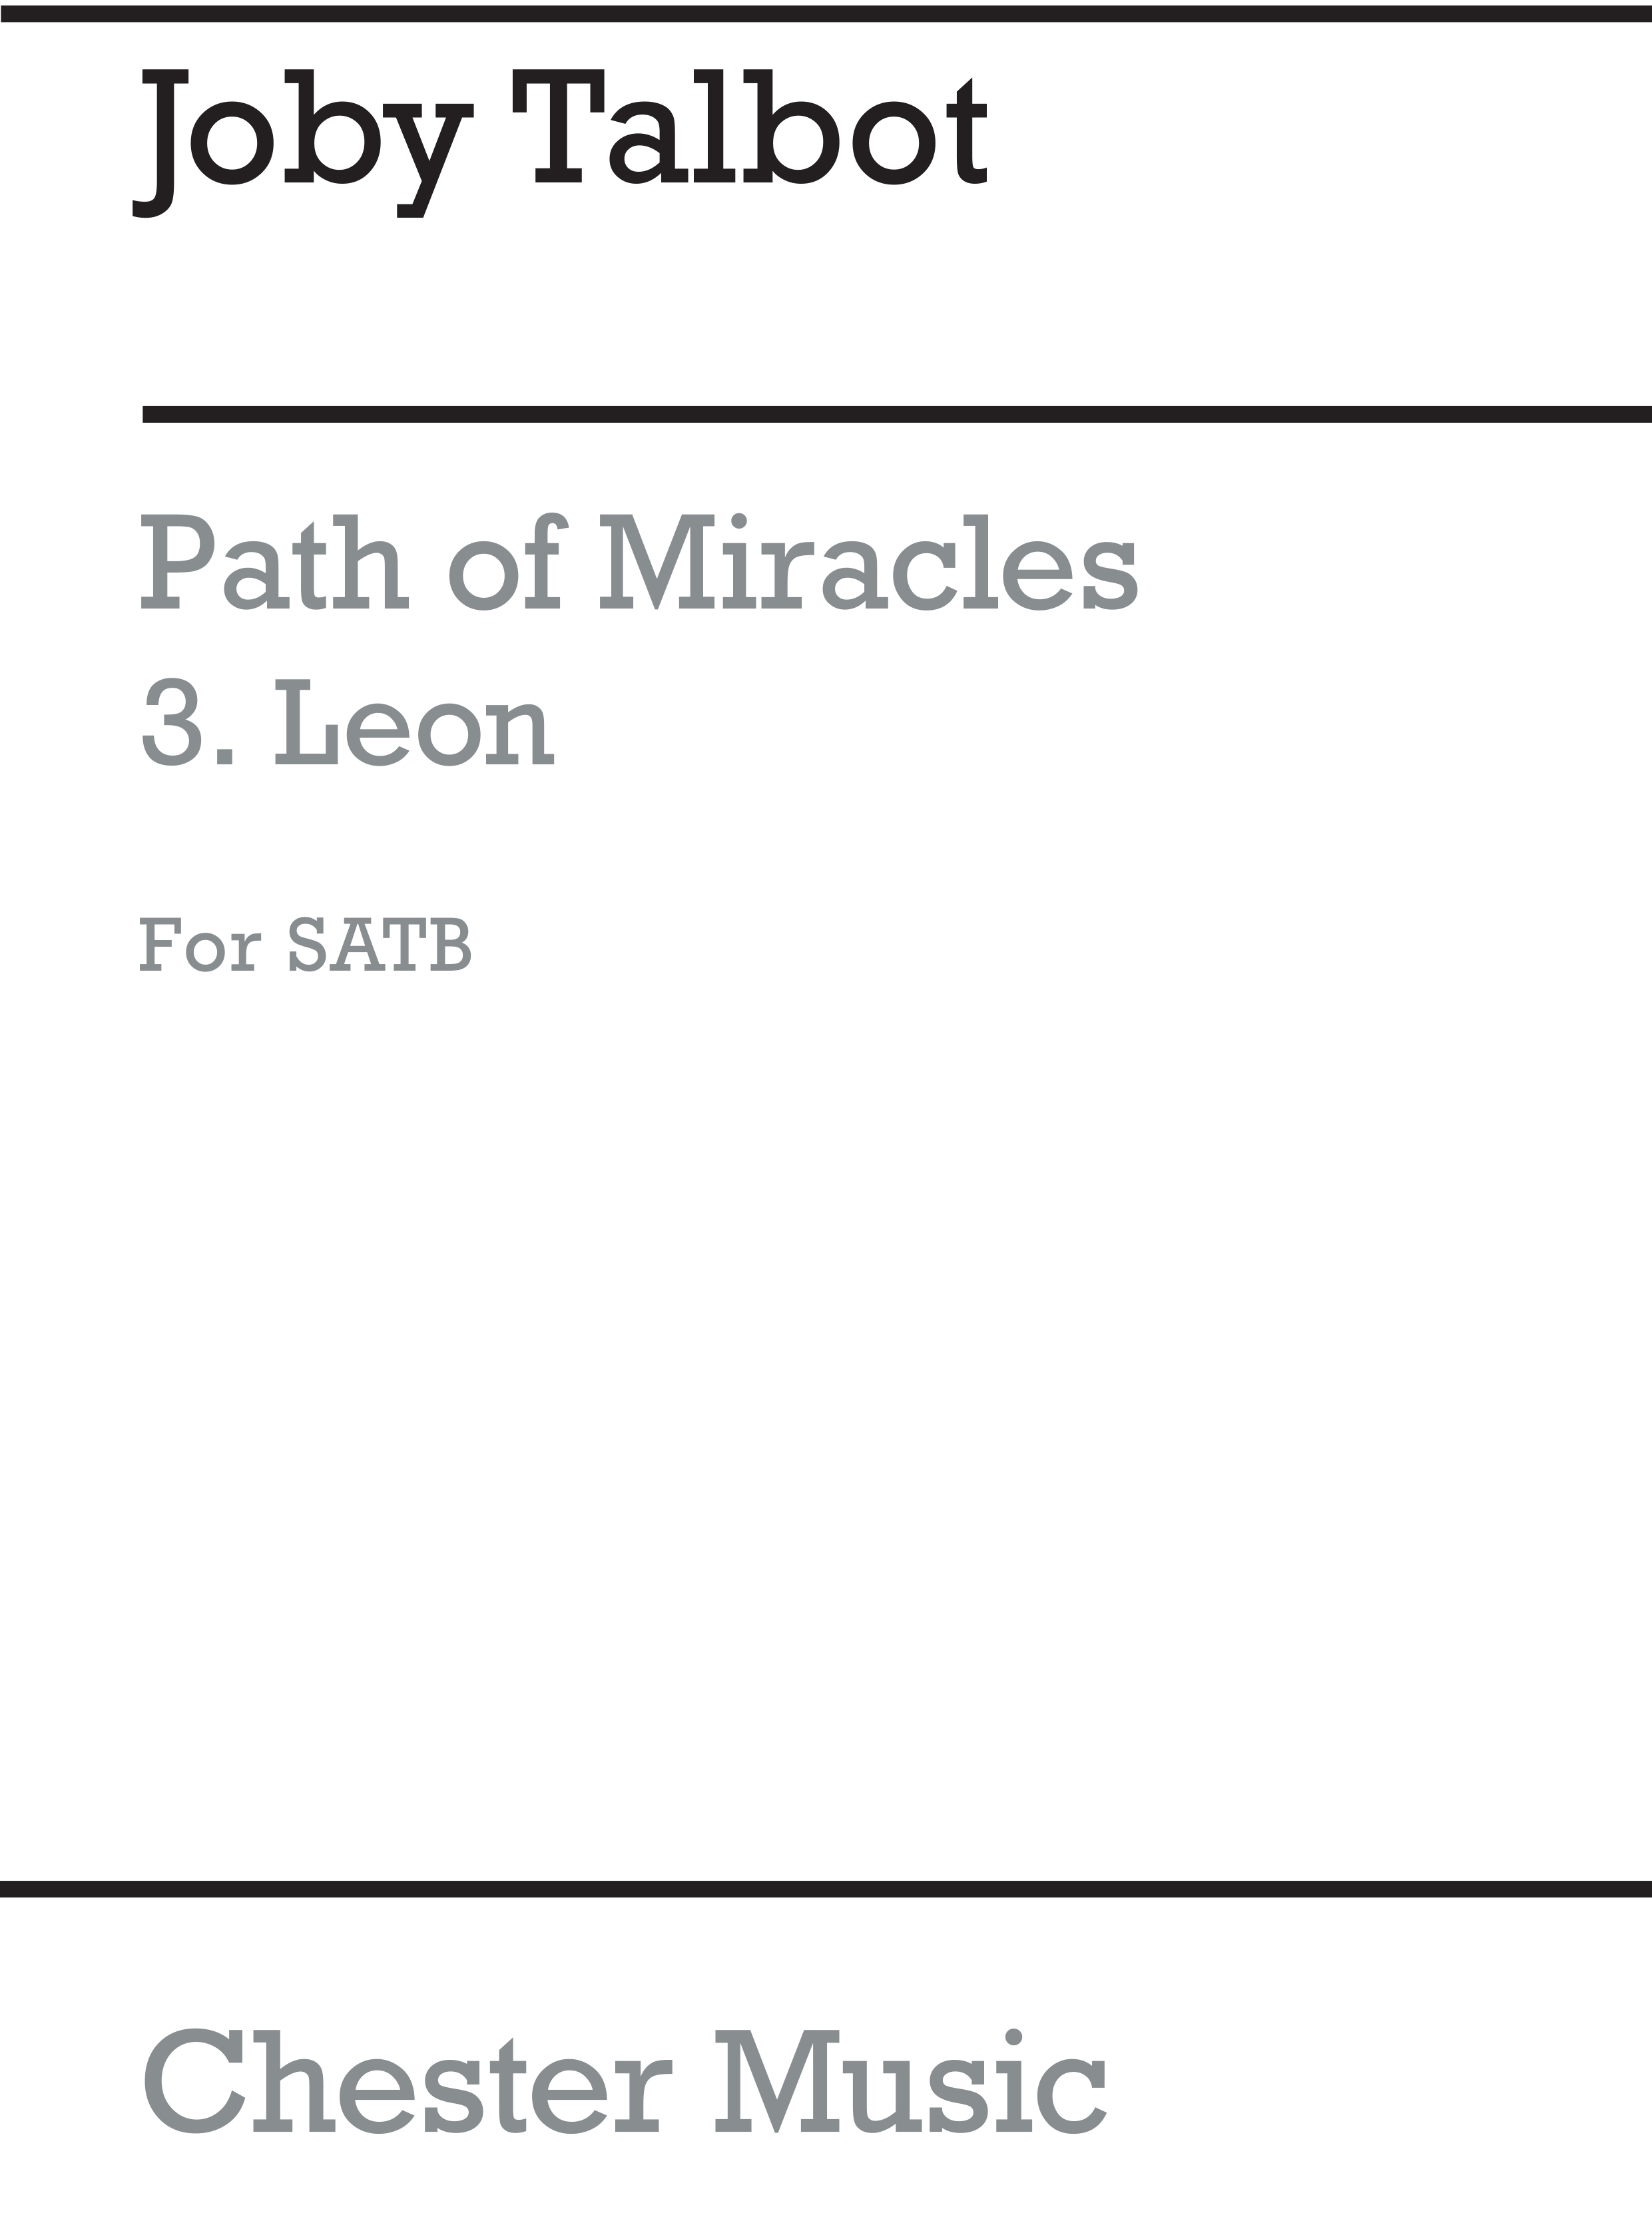 Joby Talbot: Path Of Miracles - Leon: SATB: Vocal Score